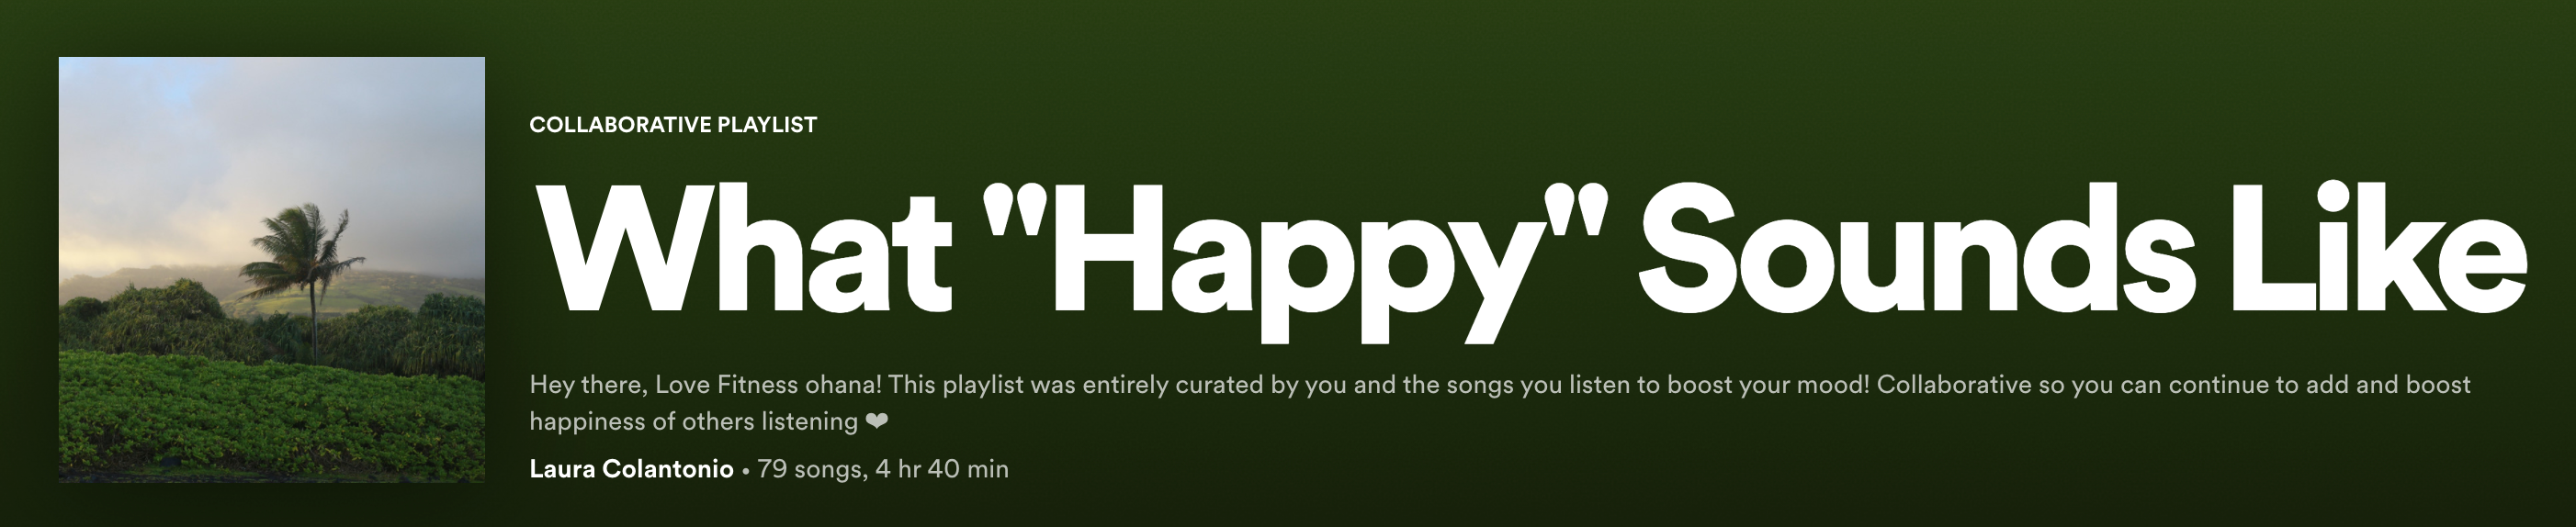 What "Happy" Sounds Like